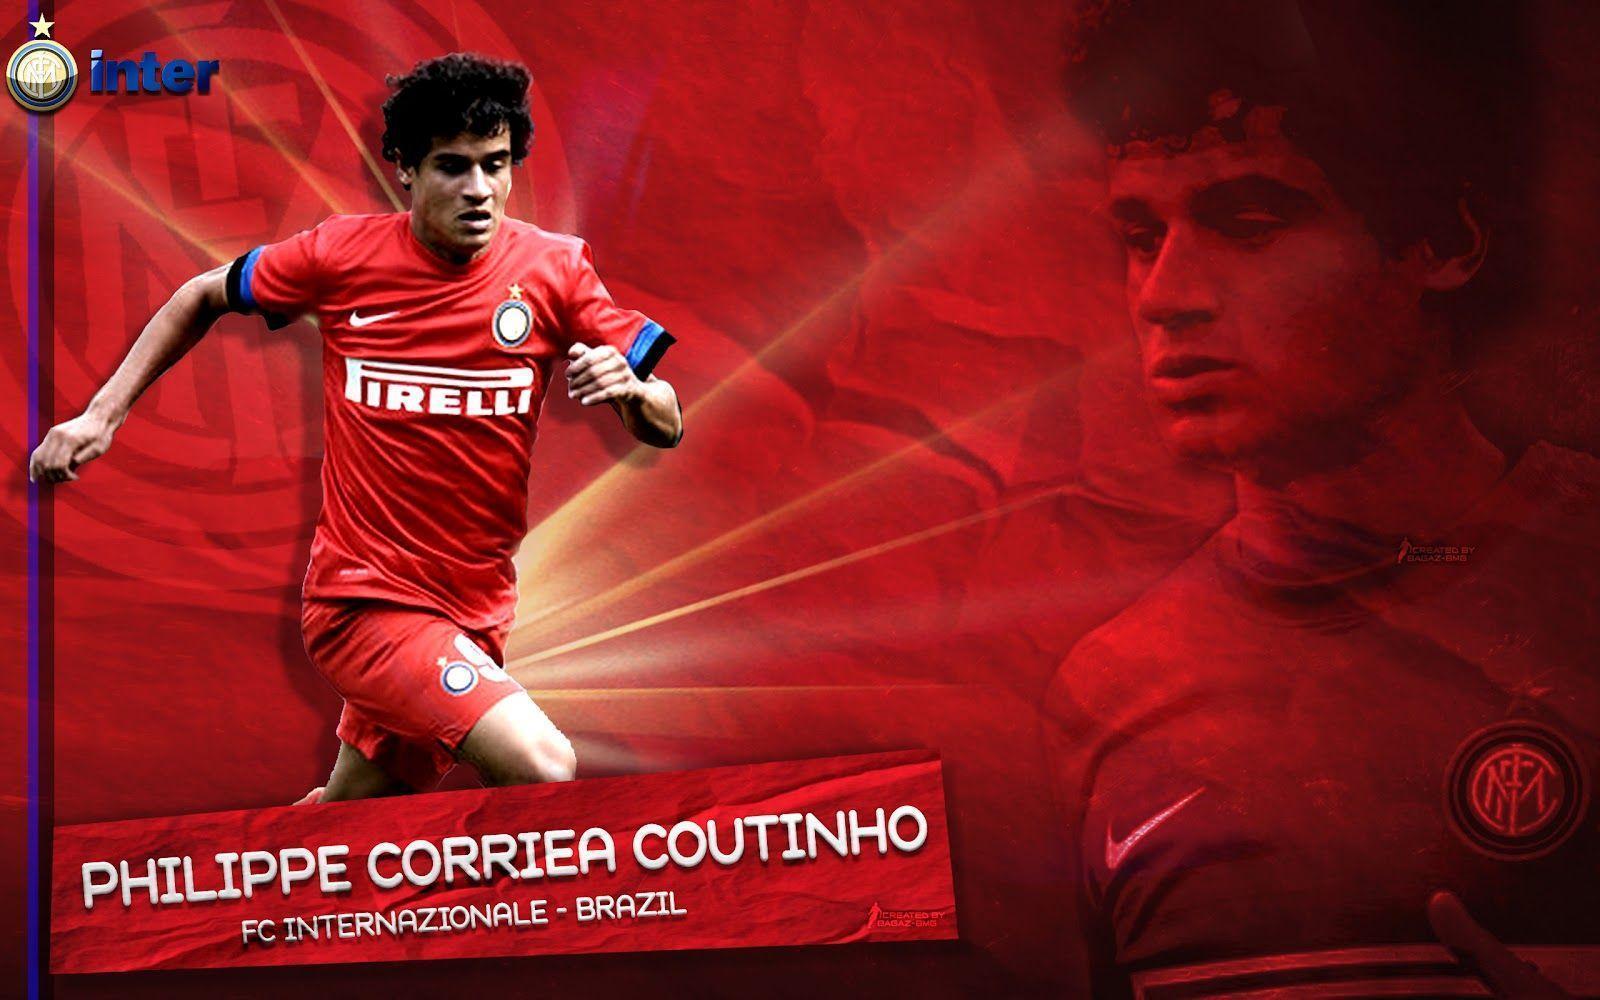 Wallpaper and Philippe coutinho